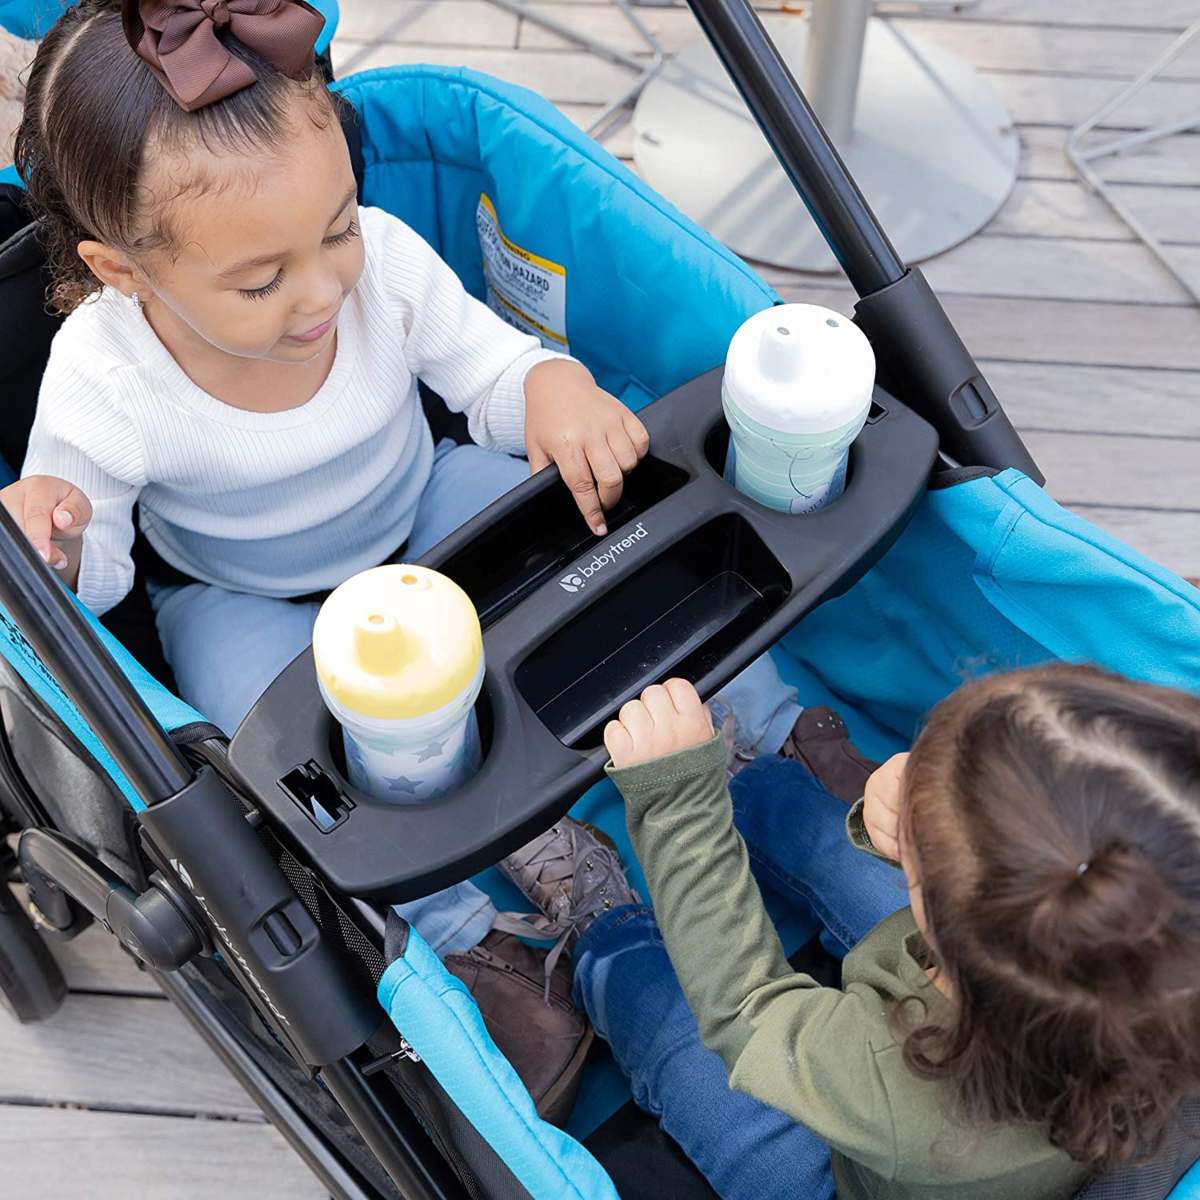 Expedition 2-in-1 Stroller Wagon Ultra Marine